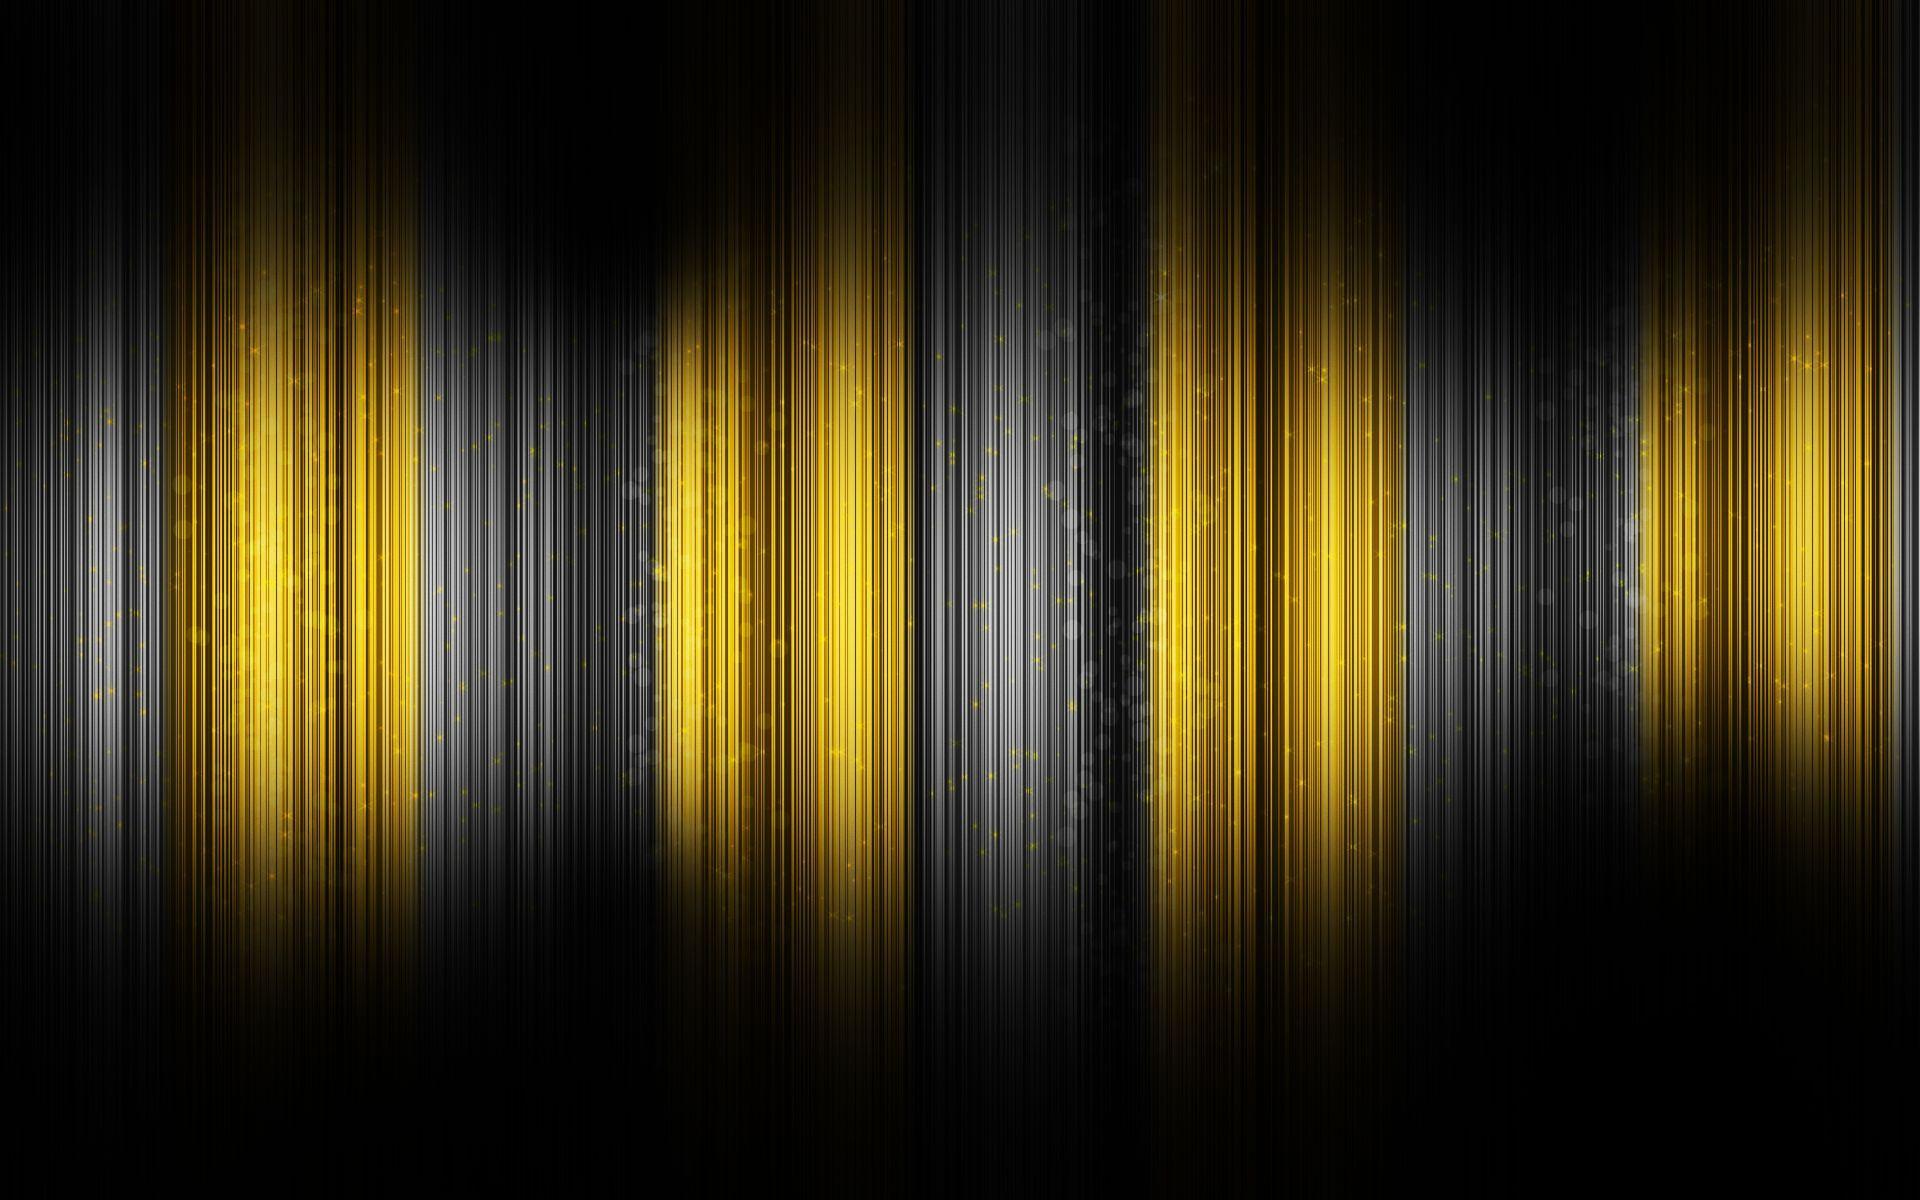 Black and Yellow Abstract Wallpapers - Top Free Black and Yellow Abstract Backgrounds